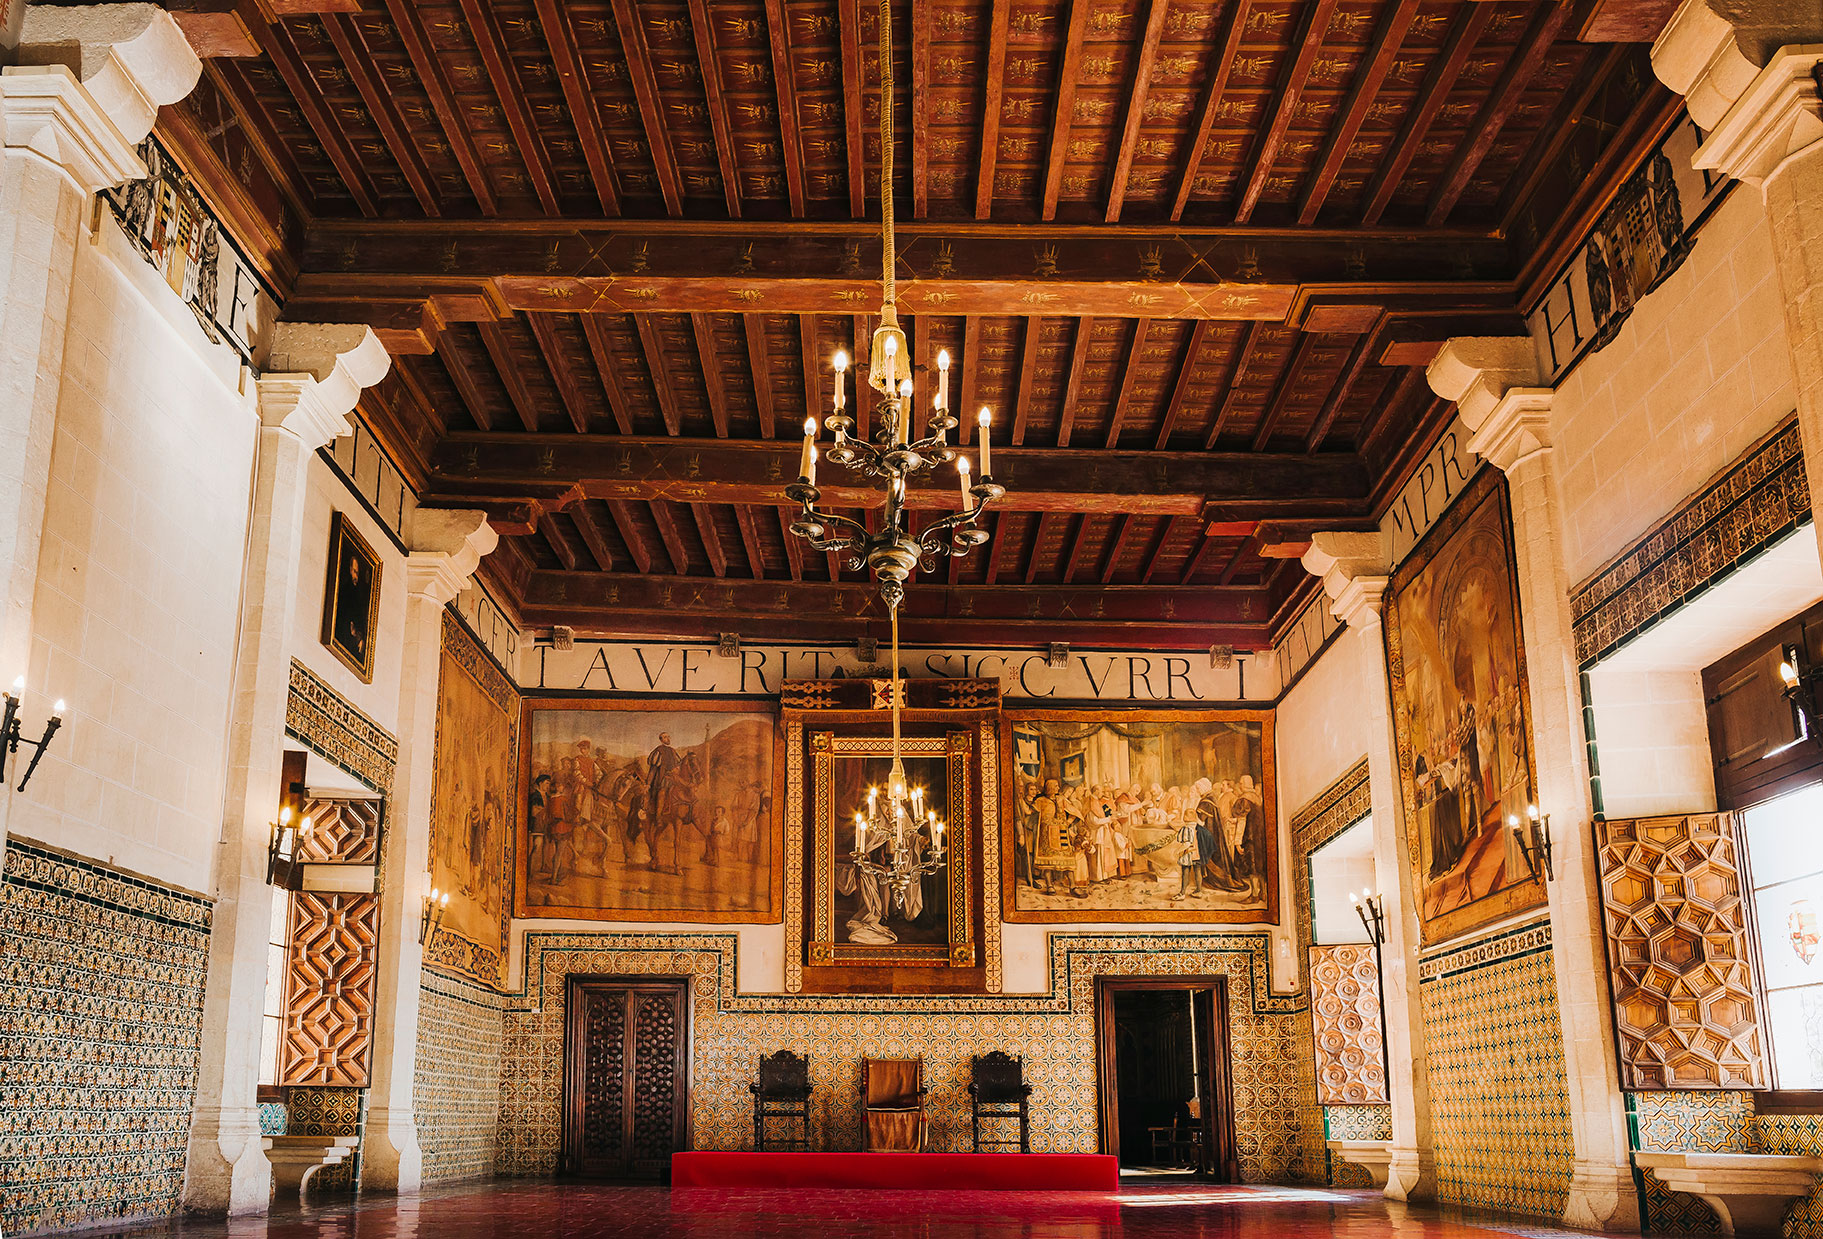 The Ducal Palace of Gandia, a gem of Valencian heritage